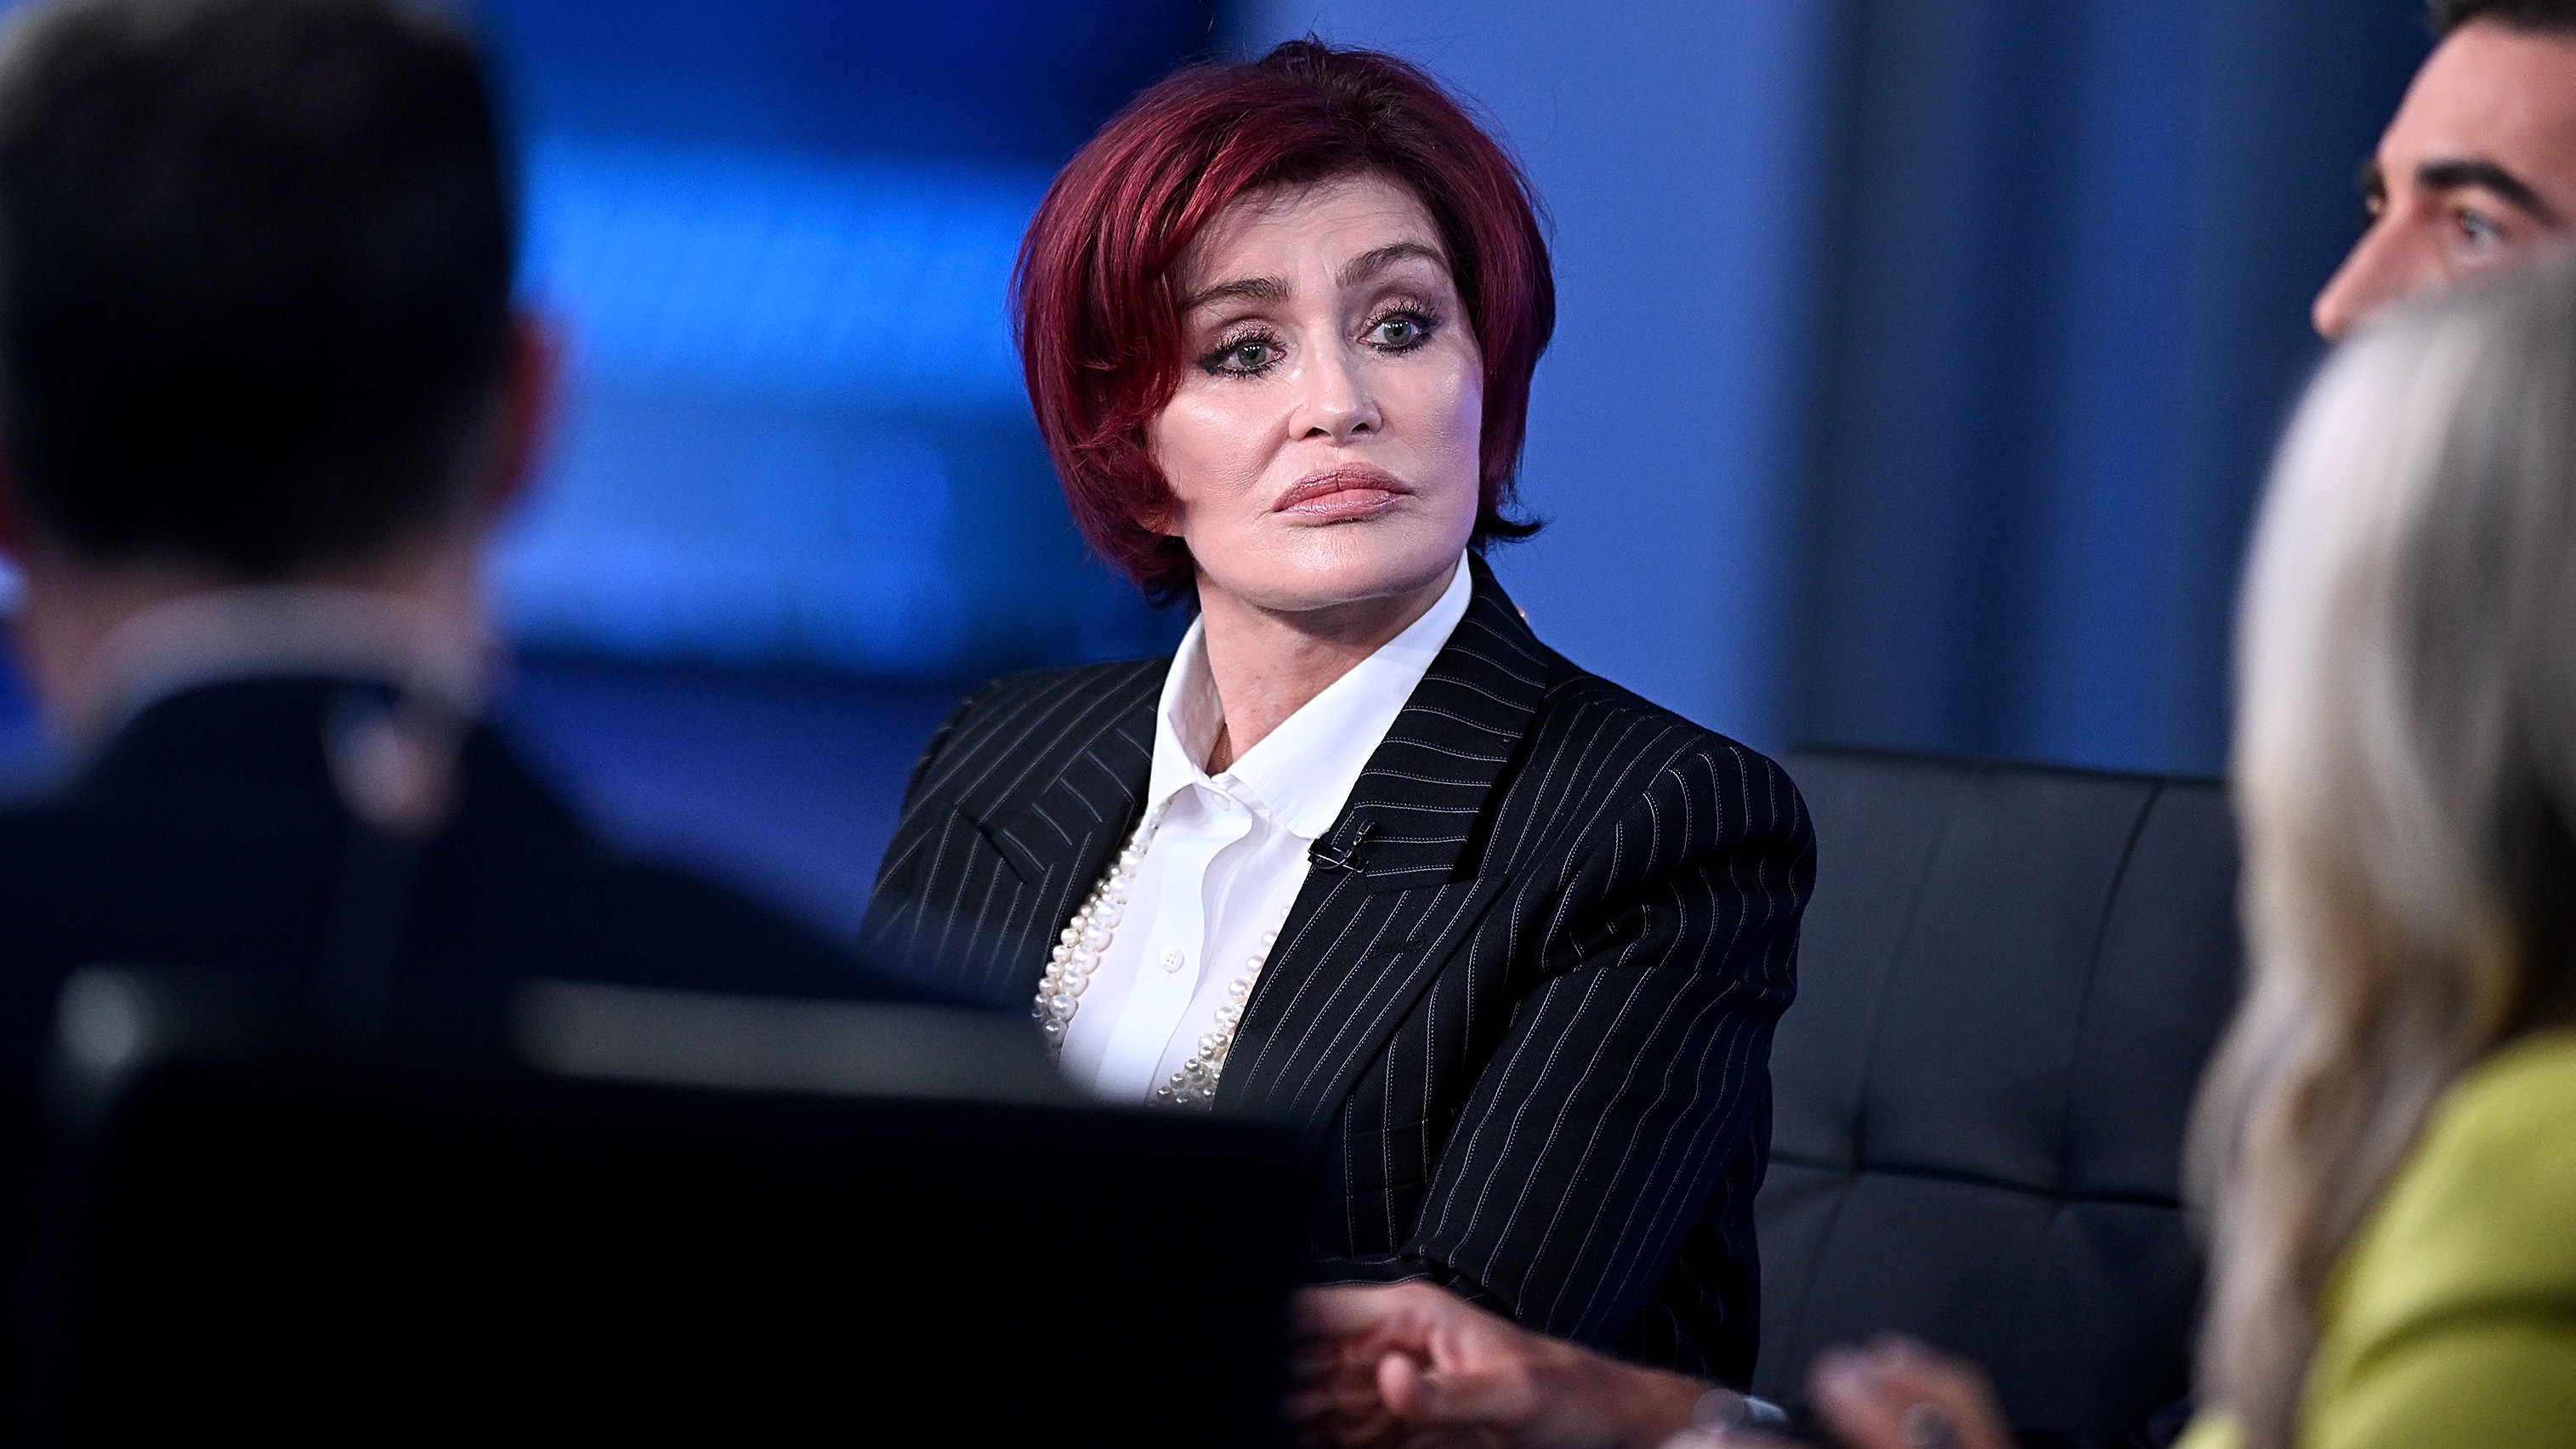 Sharon Osbourne at FOX Studios on September 27, 2022 in New York City | Source: Getty Images